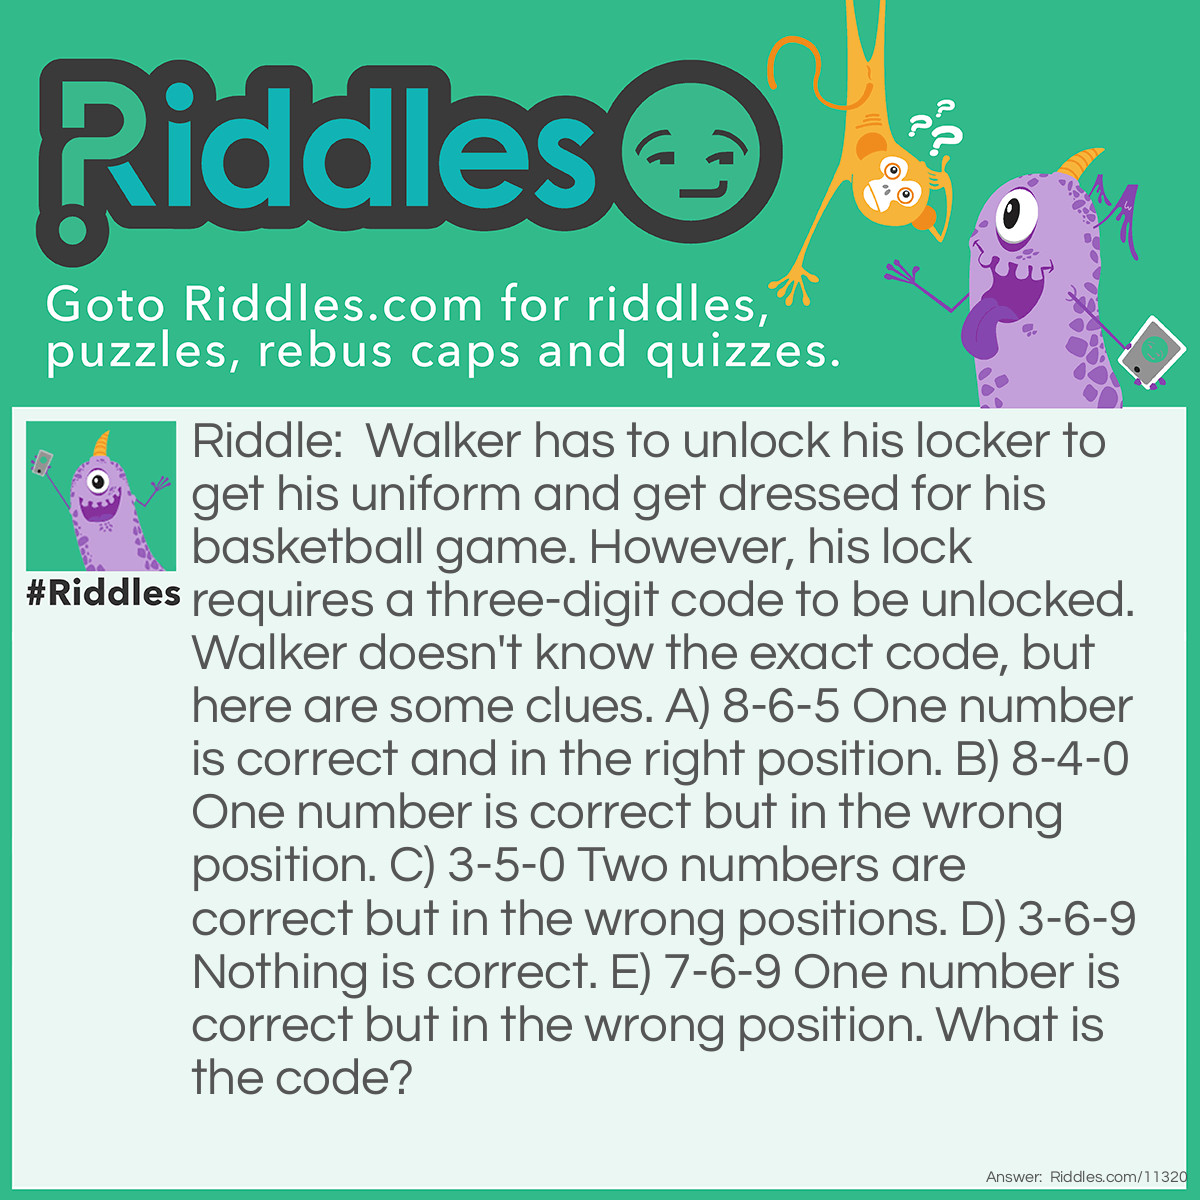 Riddle: Walker has to unlock his locker to get his uniform and get dressed for his basketball game. However, his lock requires a three-digit code to be unlocked. Walker doesn't know the exact code, but here are some clues. A) 8-6-5 One number is correct and in the right position. B) 8-4-0 One number is correct but in the wrong position. C) 3-5-0 Two numbers are correct but in the wrong positions. D) 3-6-9 Nothing is correct. E) 7-6-9 One number is correct but in the wrong position. What is the code? Answer: The code is 0-7-5. Starting with Clue D, we can eliminate 3, 6, and 9, and all instances of those numbers, because none of them are in the final code. 8 cannot be in the final code because Clues A and B would contradict each other if it was in the code. This means that 5 is in the code, and it takes the third position; we can therefore eliminate 4, too. From Clue C, we can conclude that 5 and 0 are part of the code, because 3 is not (we already eliminated it based on Clue D). And based on Clue E, the last digit we need is 7, because we already eliminated 6 and 9 based on Clue D. We do not know the positions of 0 and 7, however, but we know that 5 takes the third position, which leaves us with just two options for the code: either 7-0-5 or 0-7-5. 7-0-5 cannot be the code because it would contradict Clue E since 7 cannot go in the first position; it can only go in the second position, while 0 goes in the first position. This means that the correct code is 0-7-5.